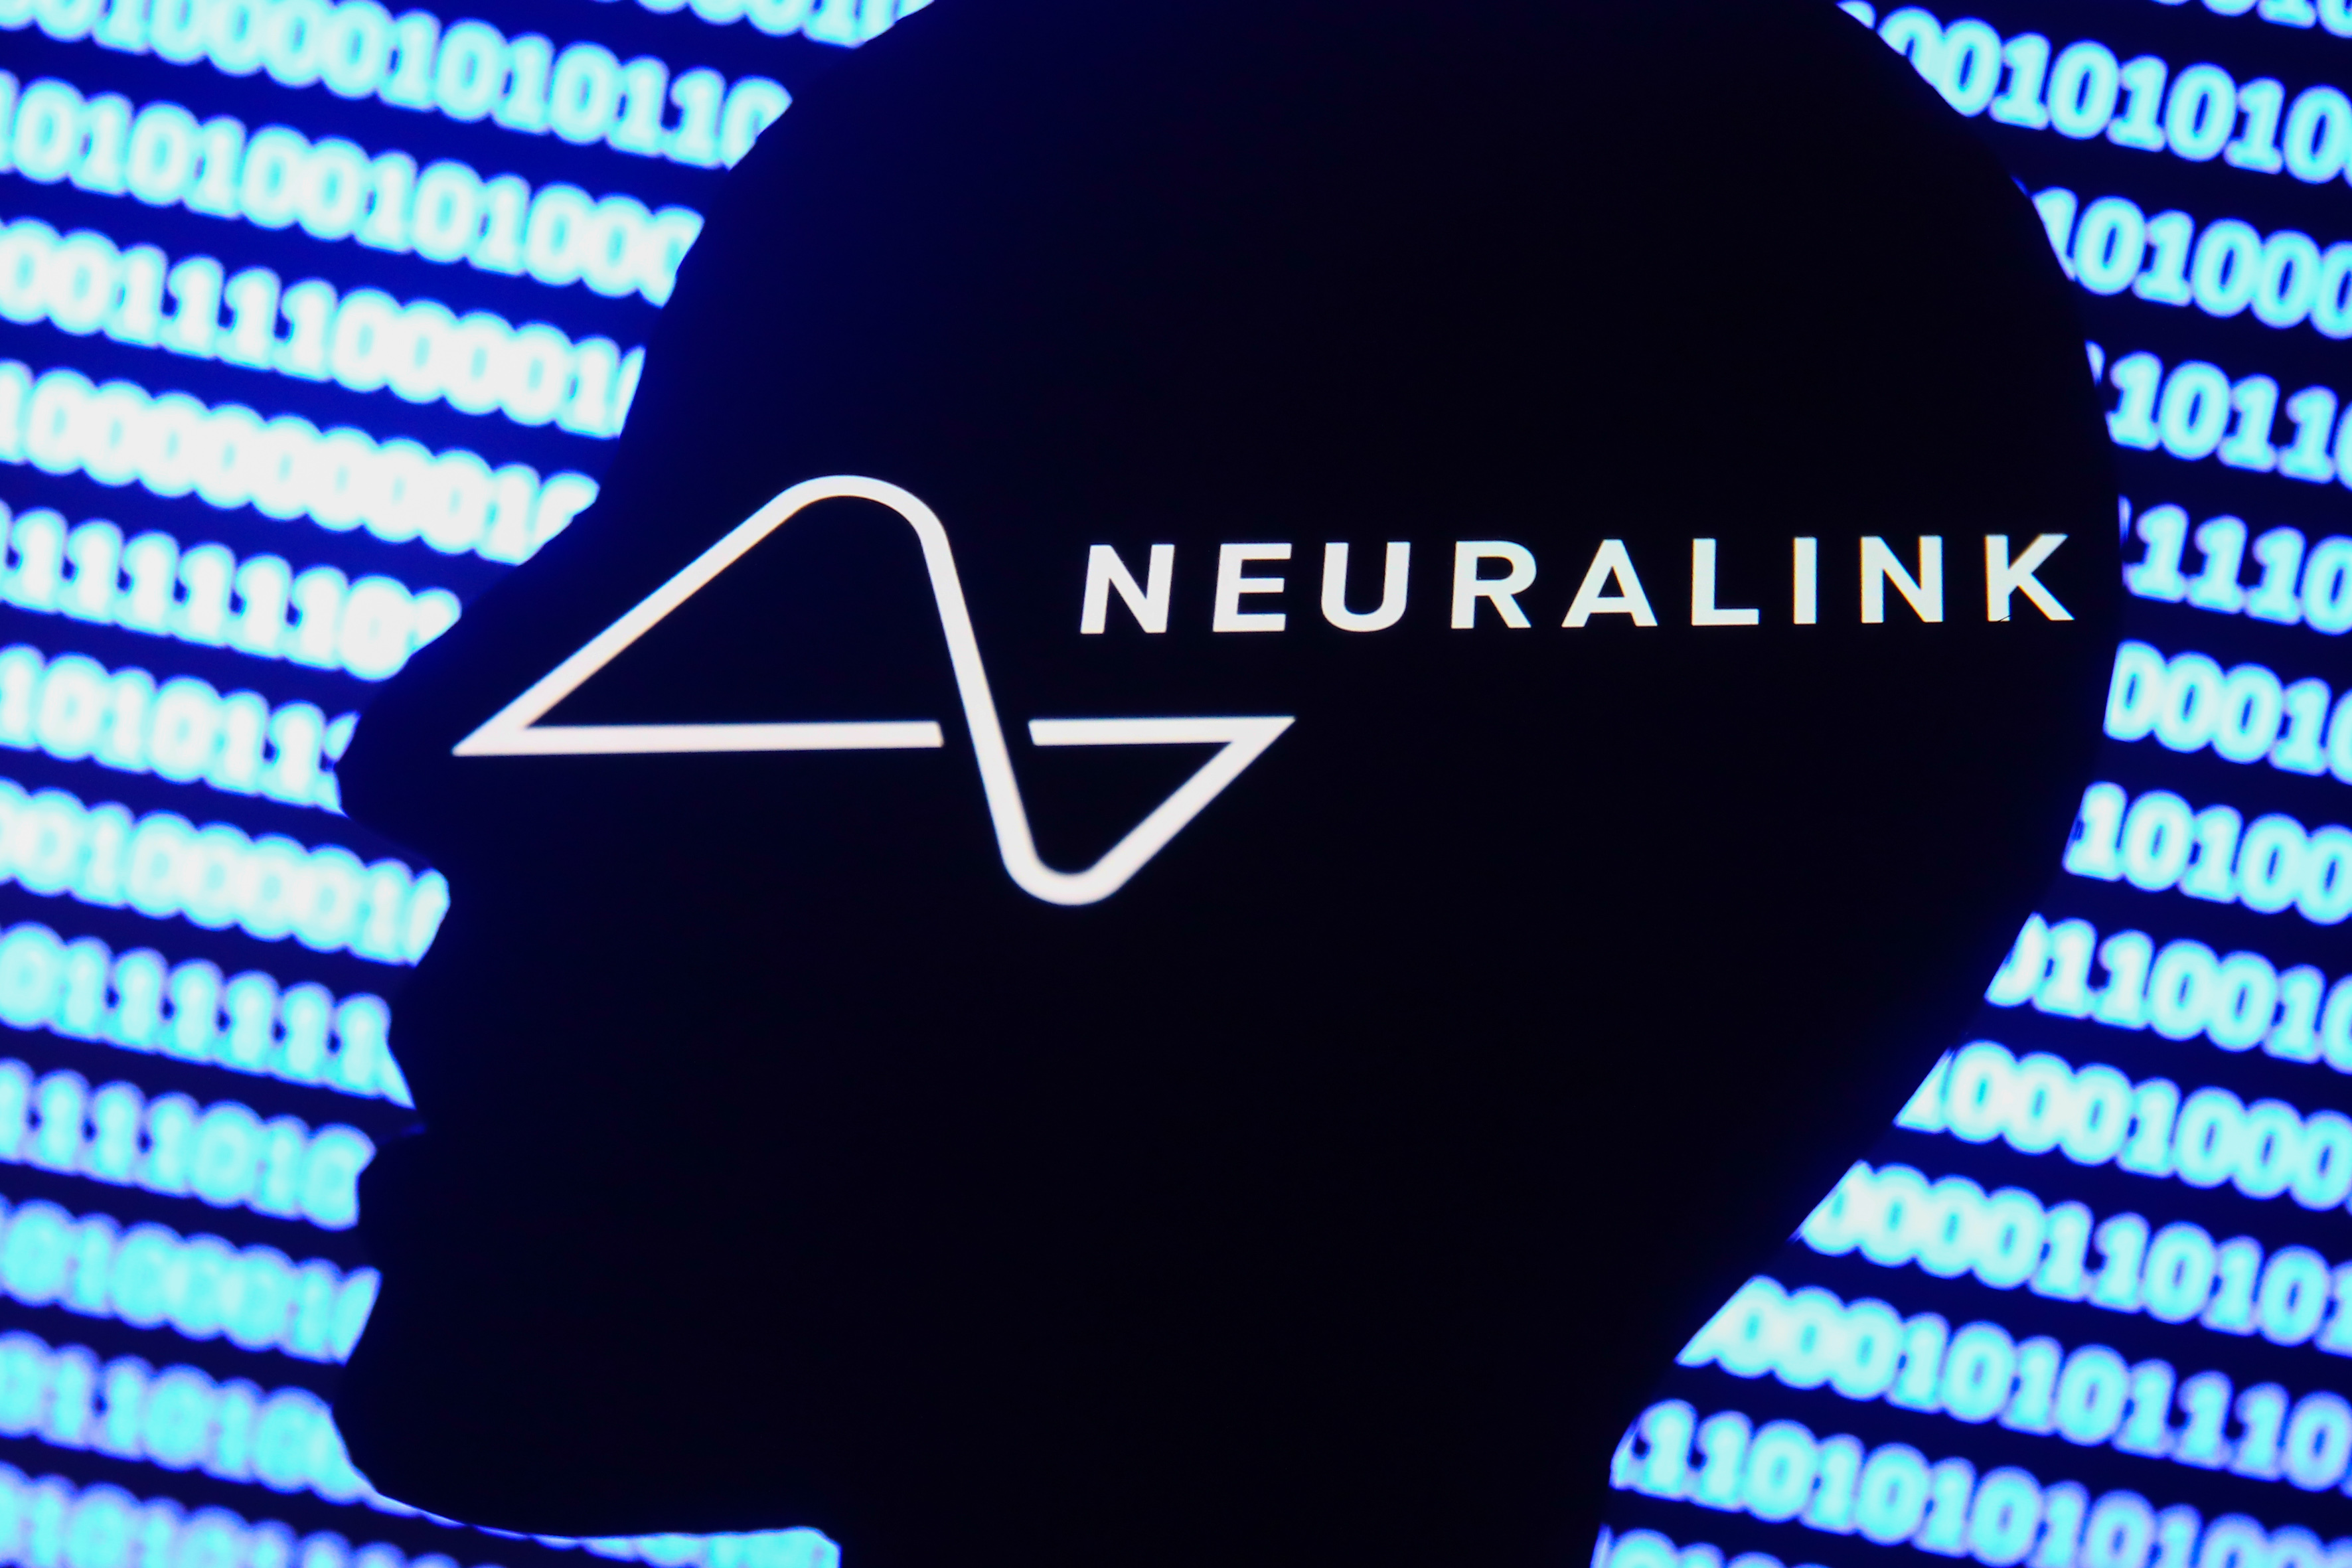 FDA reportedly rejects Neuralink's request to begin human trials of its brain implant